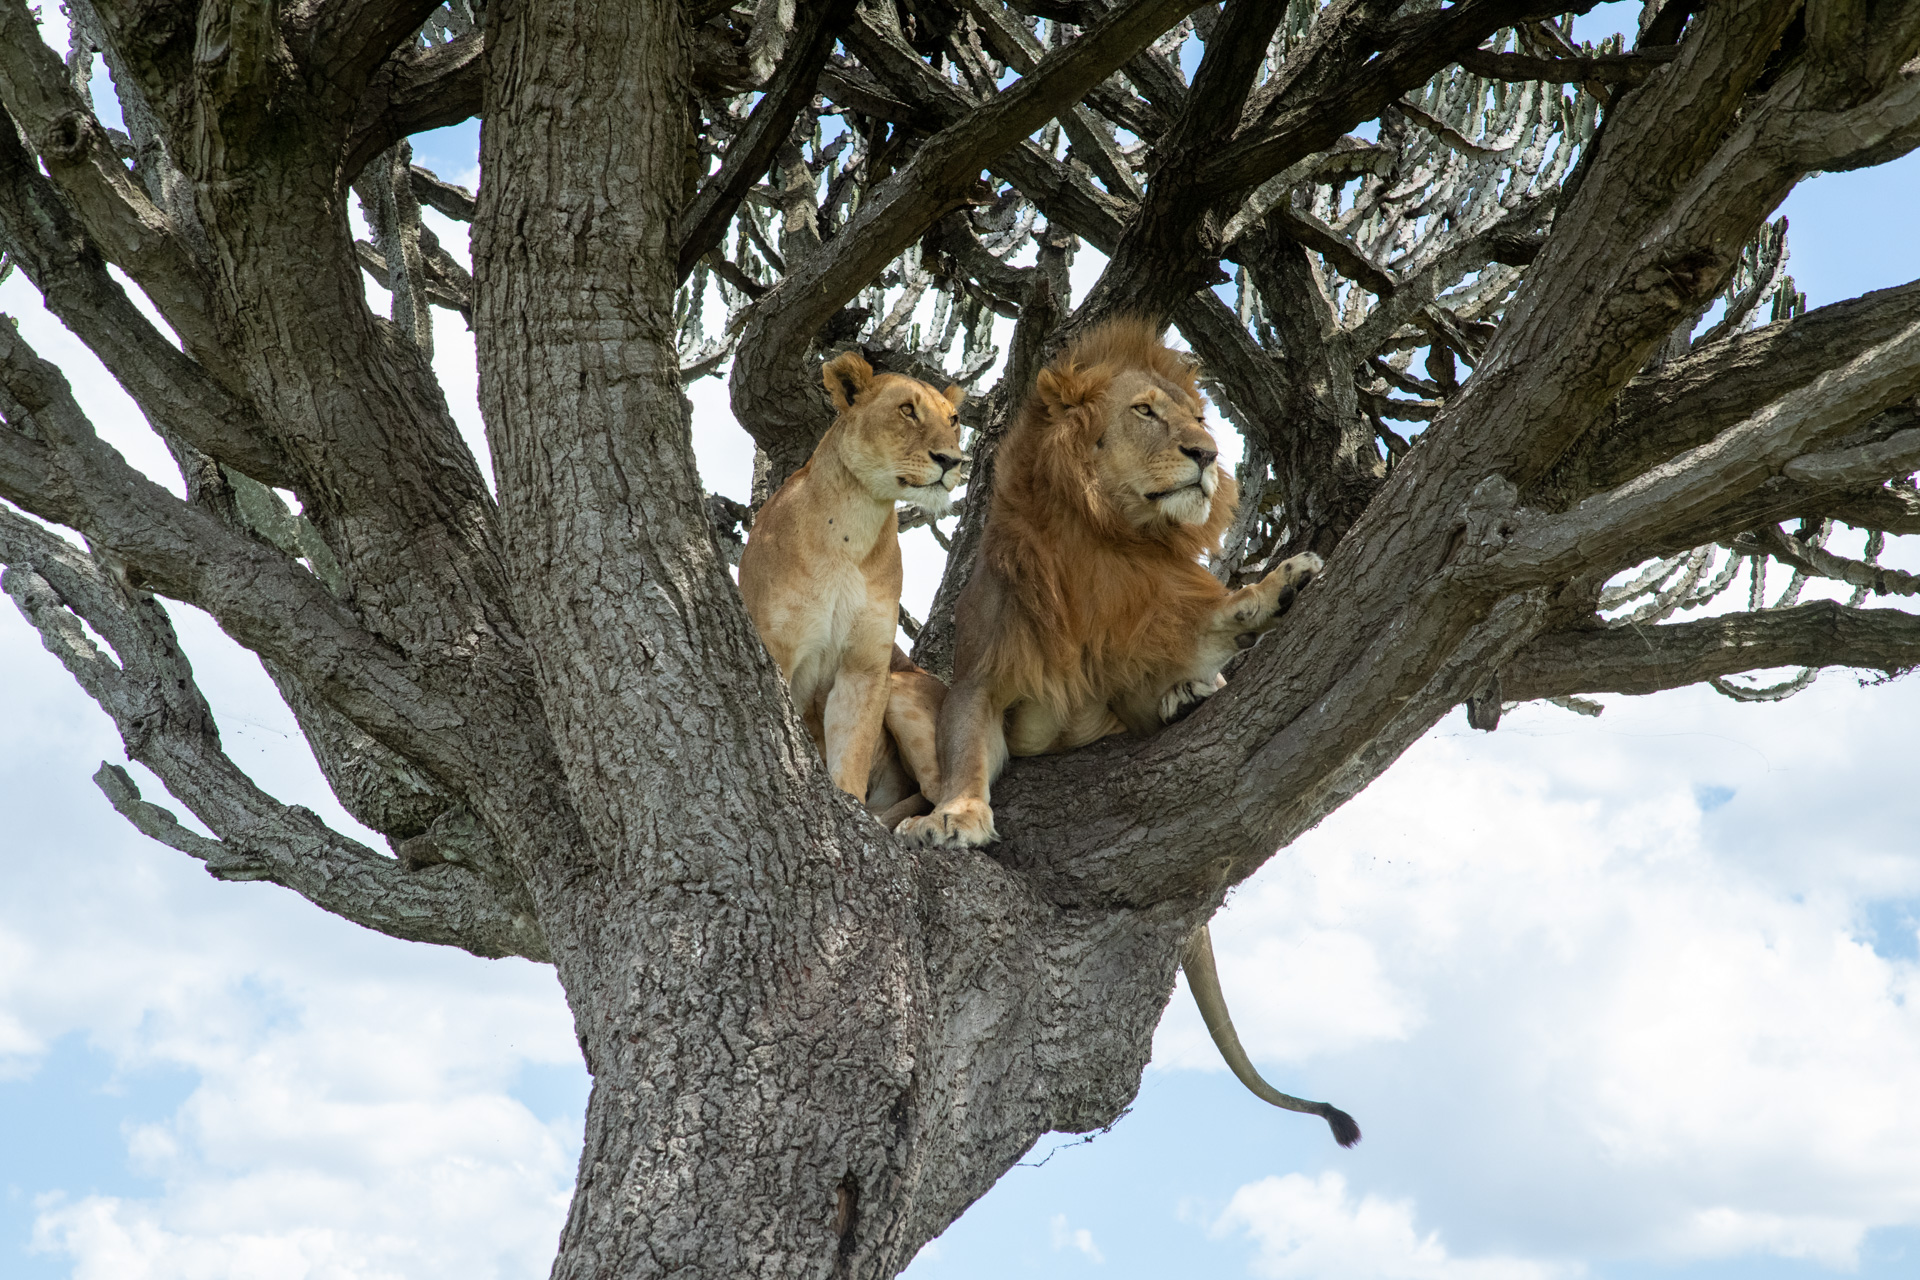 Above: Two lions just shooting the breeze 